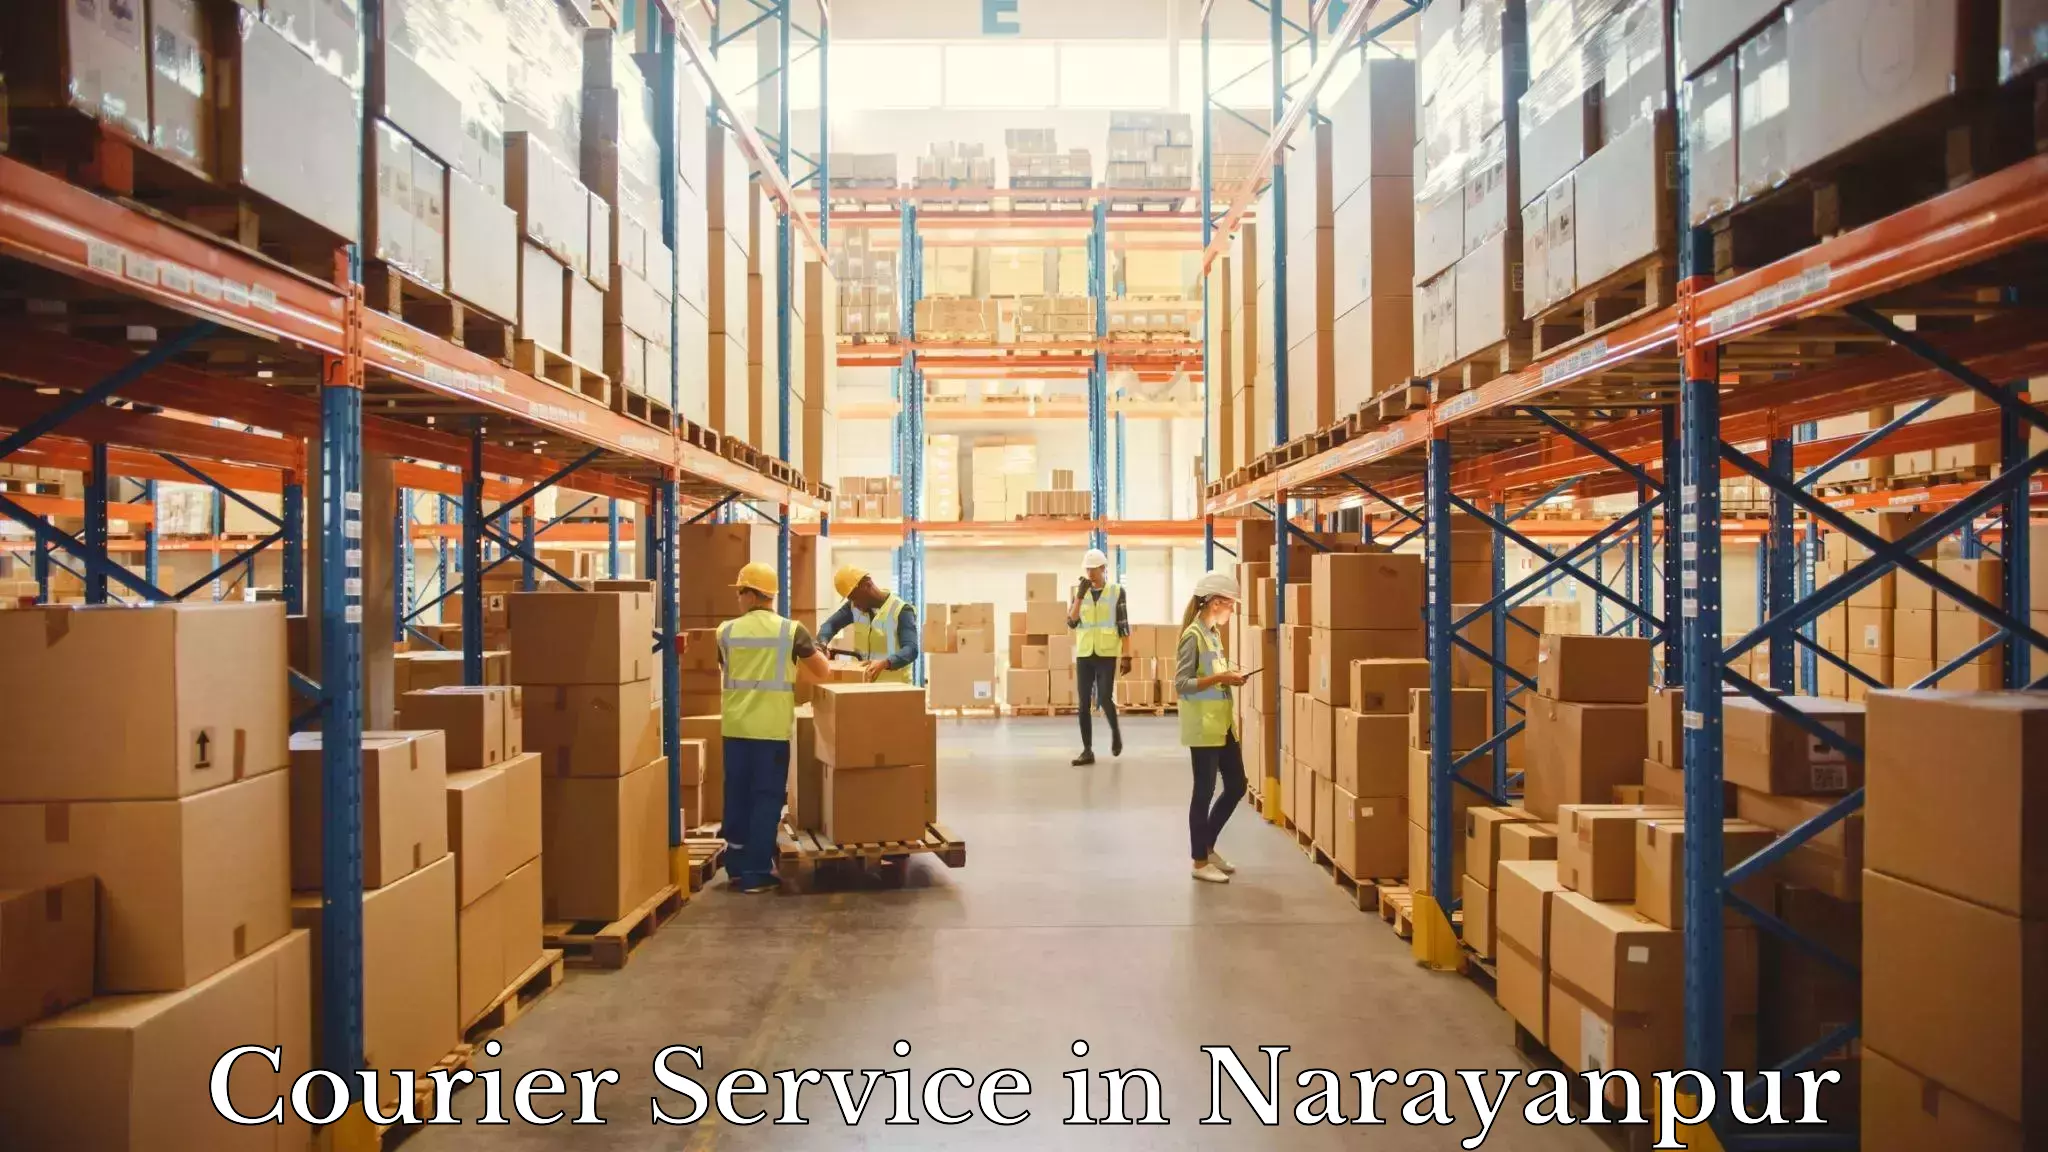 Express logistics providers in Narayanpur